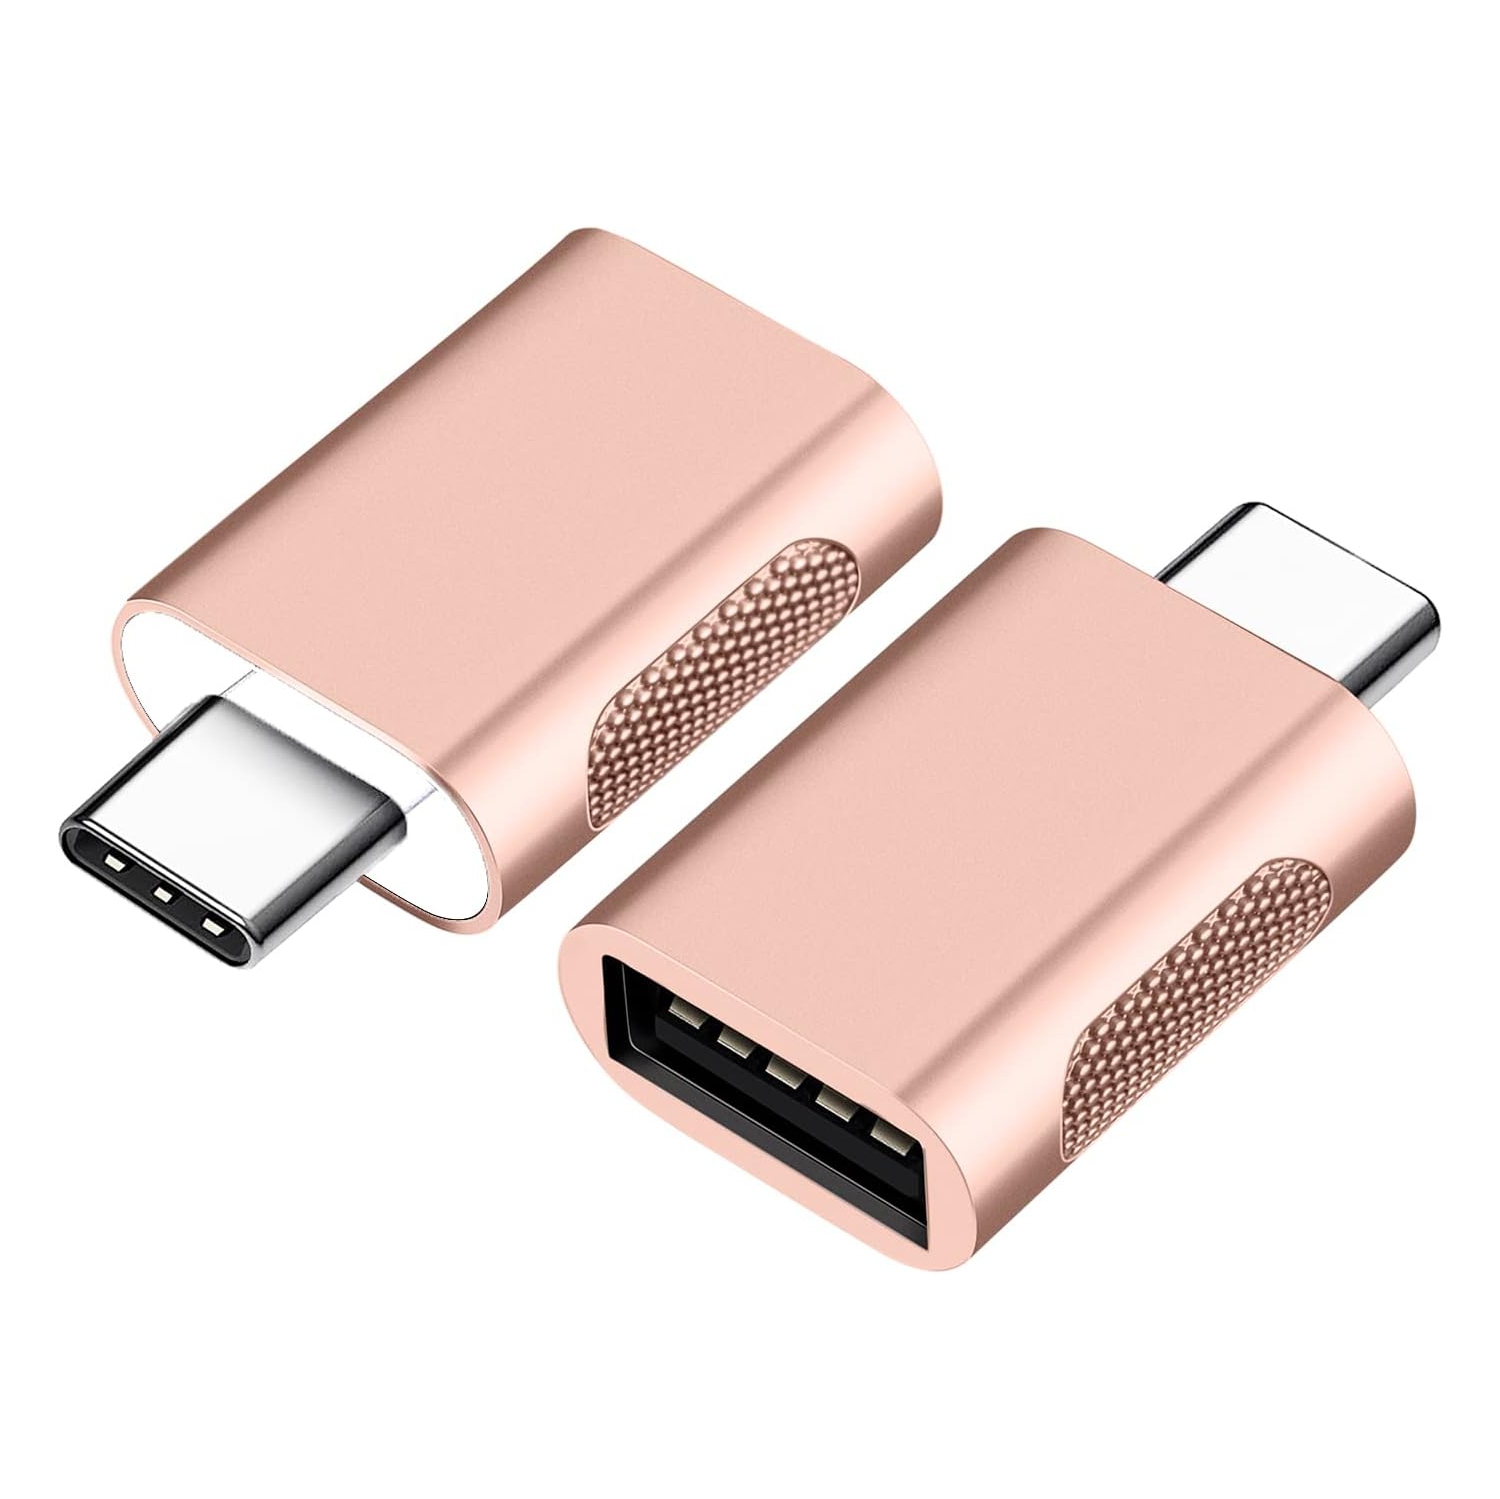 Ombriatech USB A to USB C Adapter for MacBook, Tesla, Laptops and More (Rose Gold)